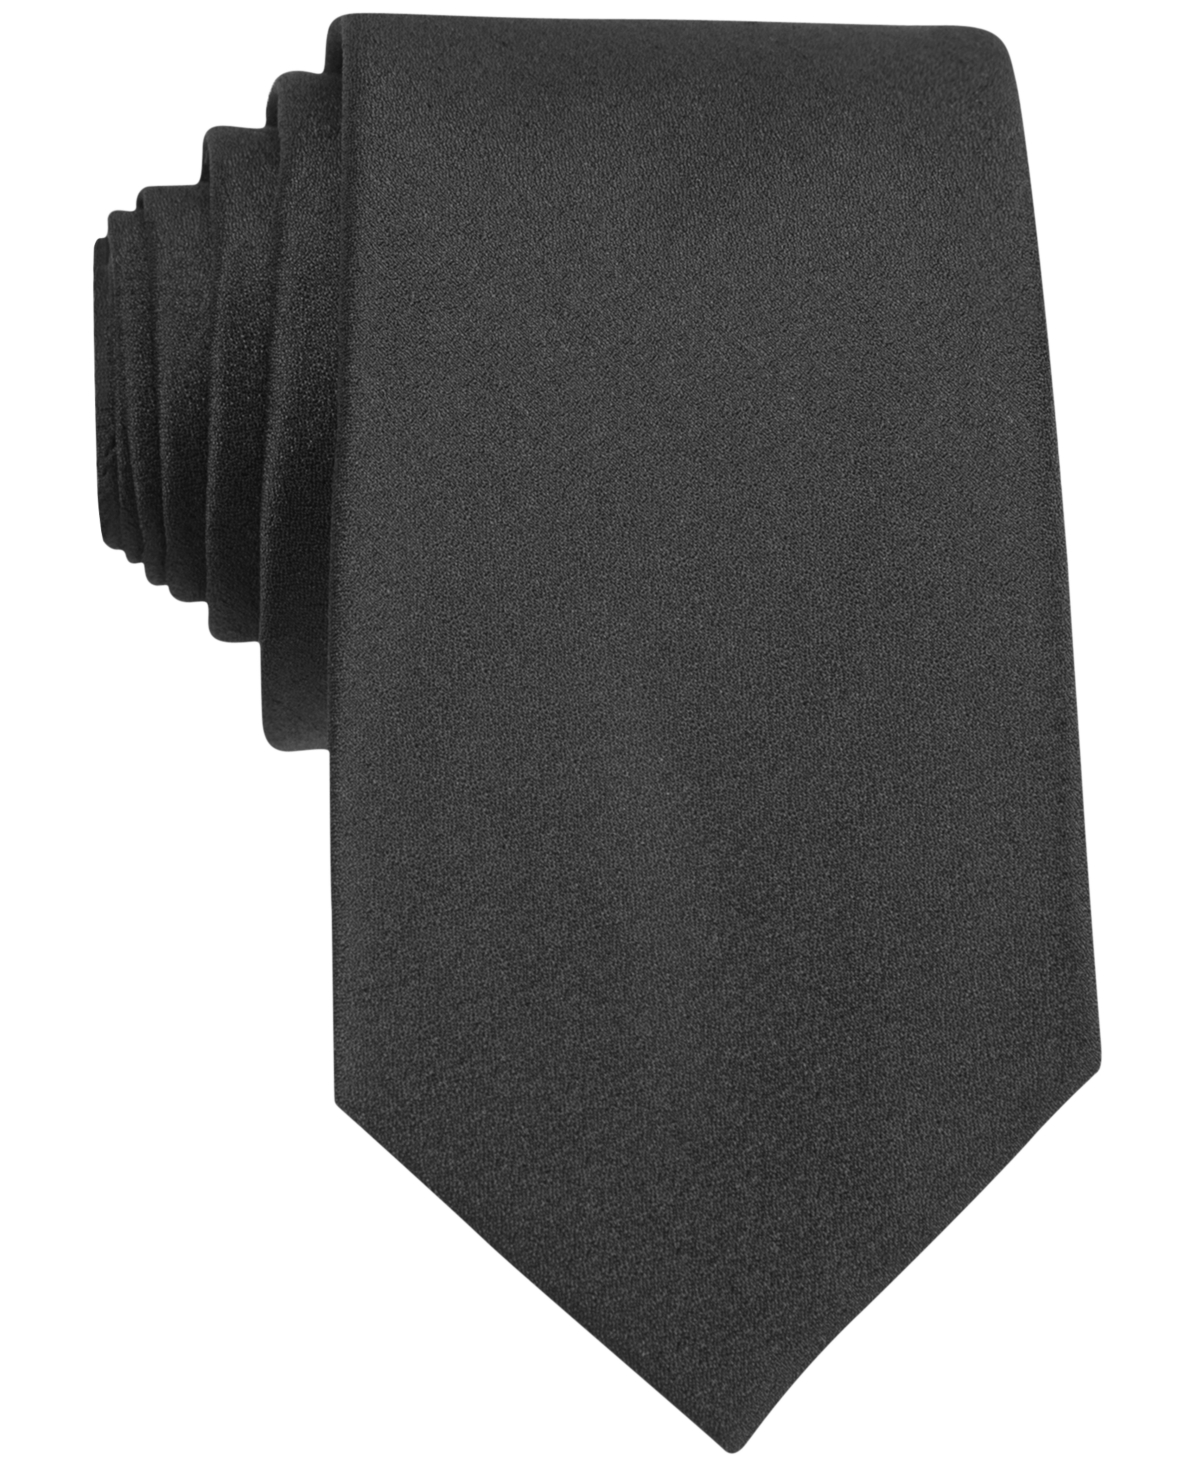 Sable Solid Tie, Created for Macy's - Black